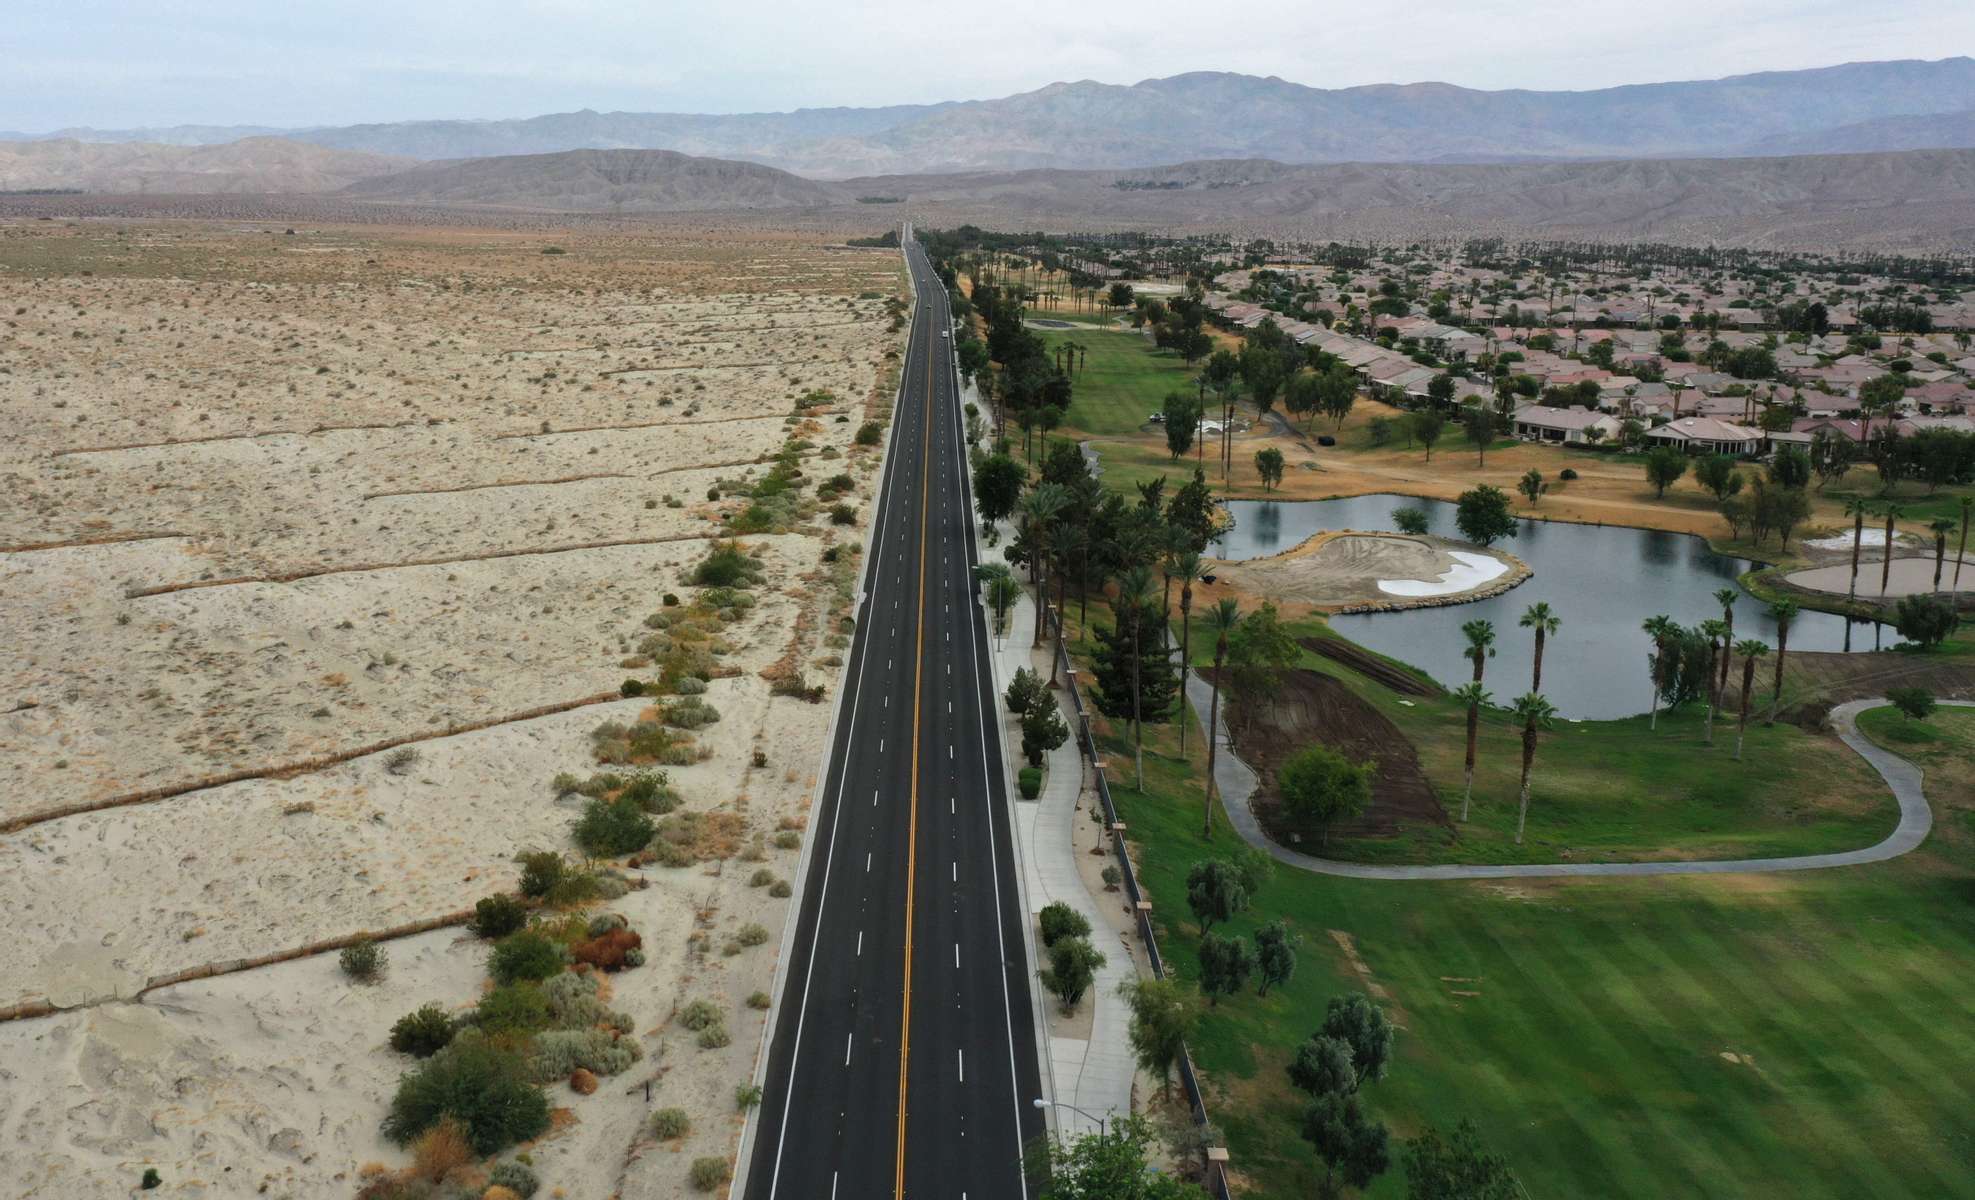 An aerial view shows a golf course next to desert landscape as California faces its worst drought since 1977, in Palm Springs, California, U.S., June 29, 2021. Picture taken with a drone June 29, 2021.